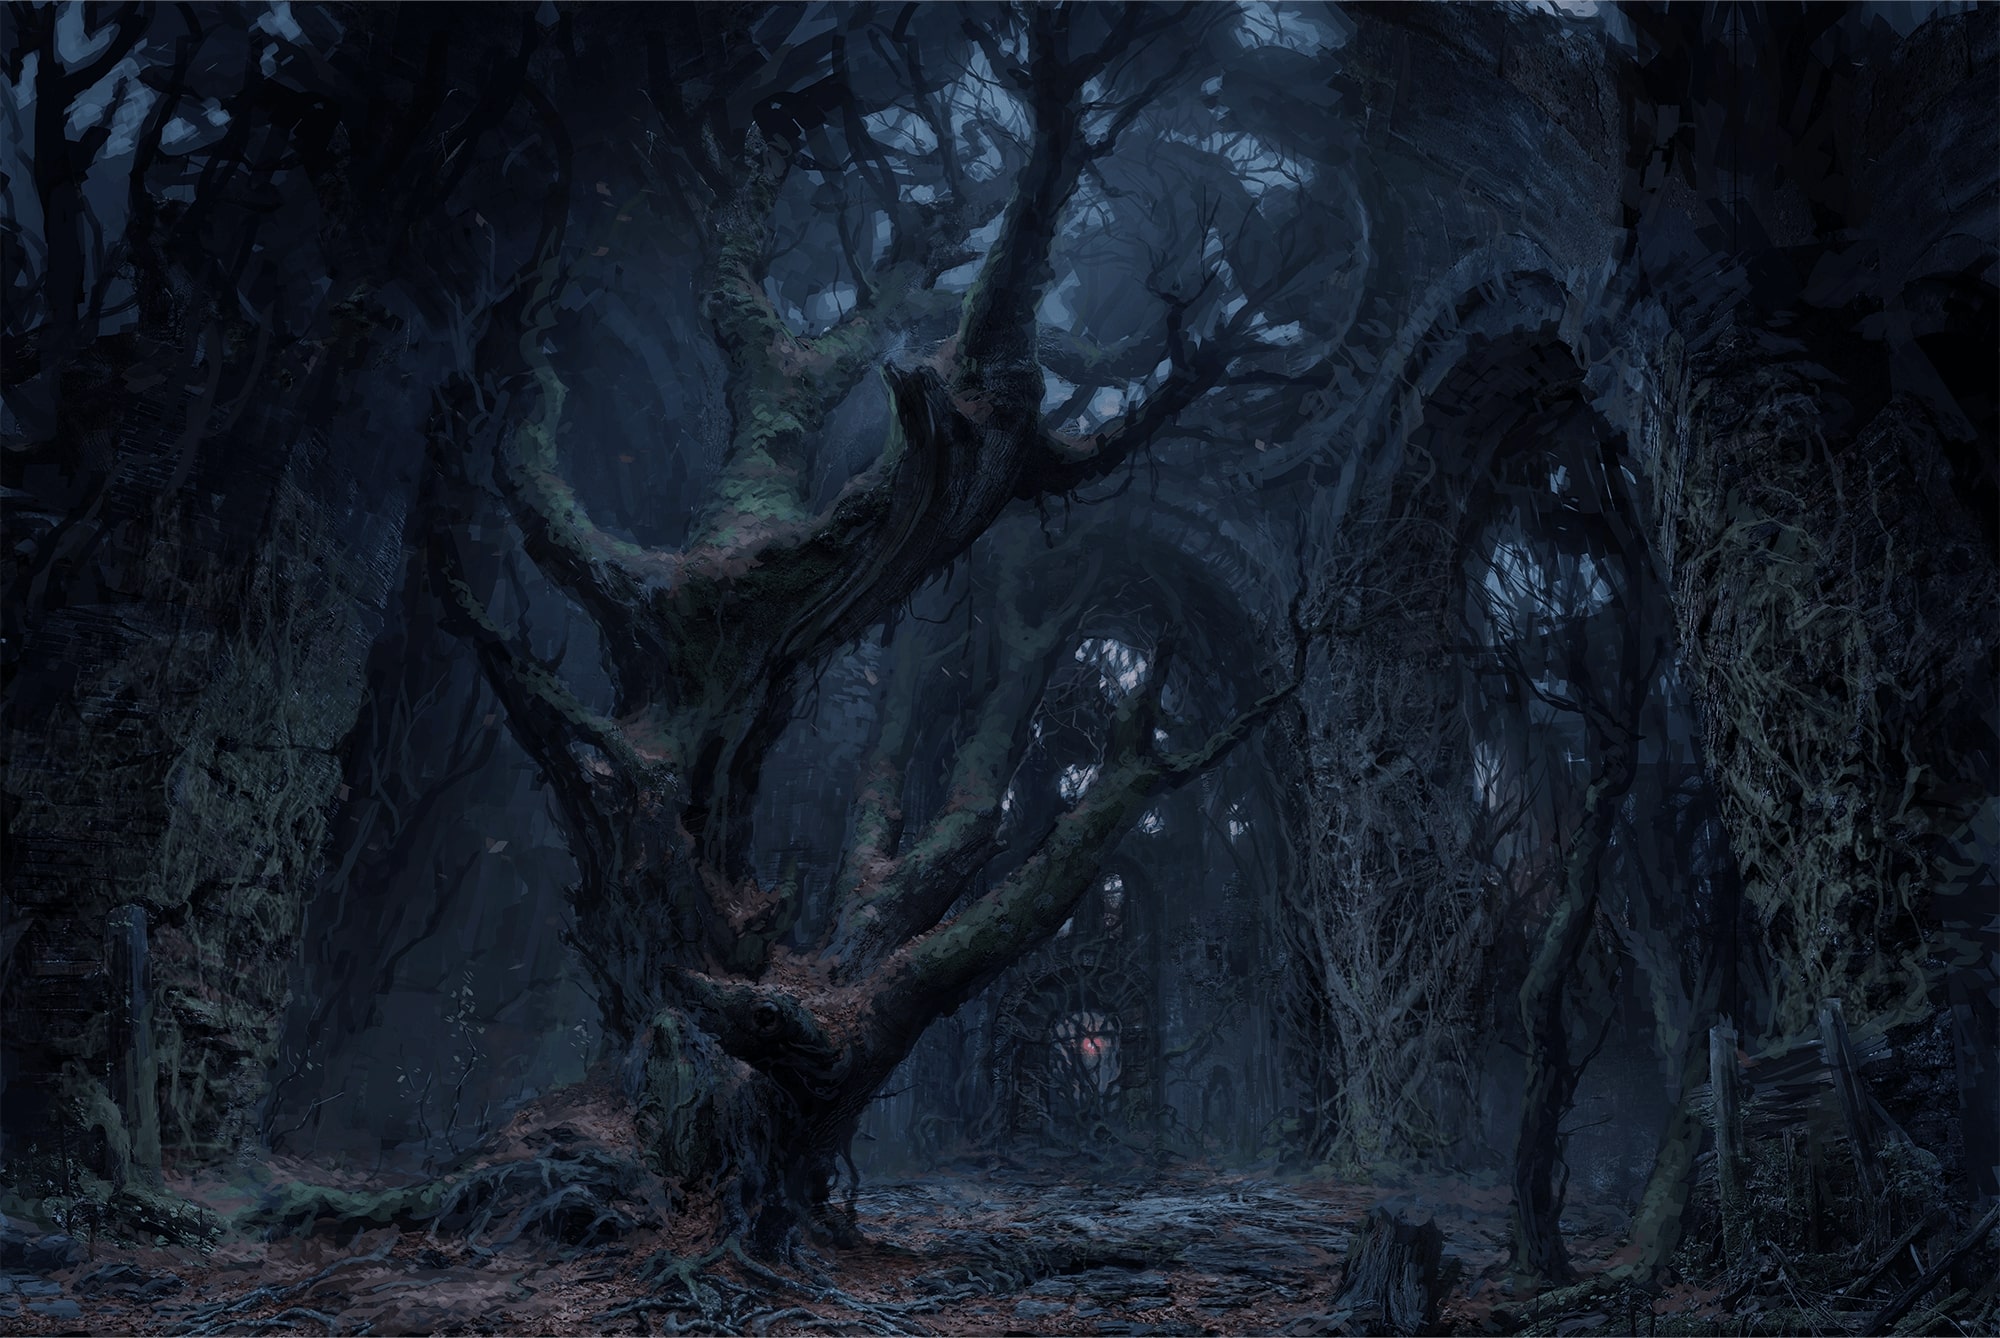 Inside the groves, even nature cannot stand against the clutch of corruption as the branches and leaves show little signs of life in the world of The Lords of the Fallen